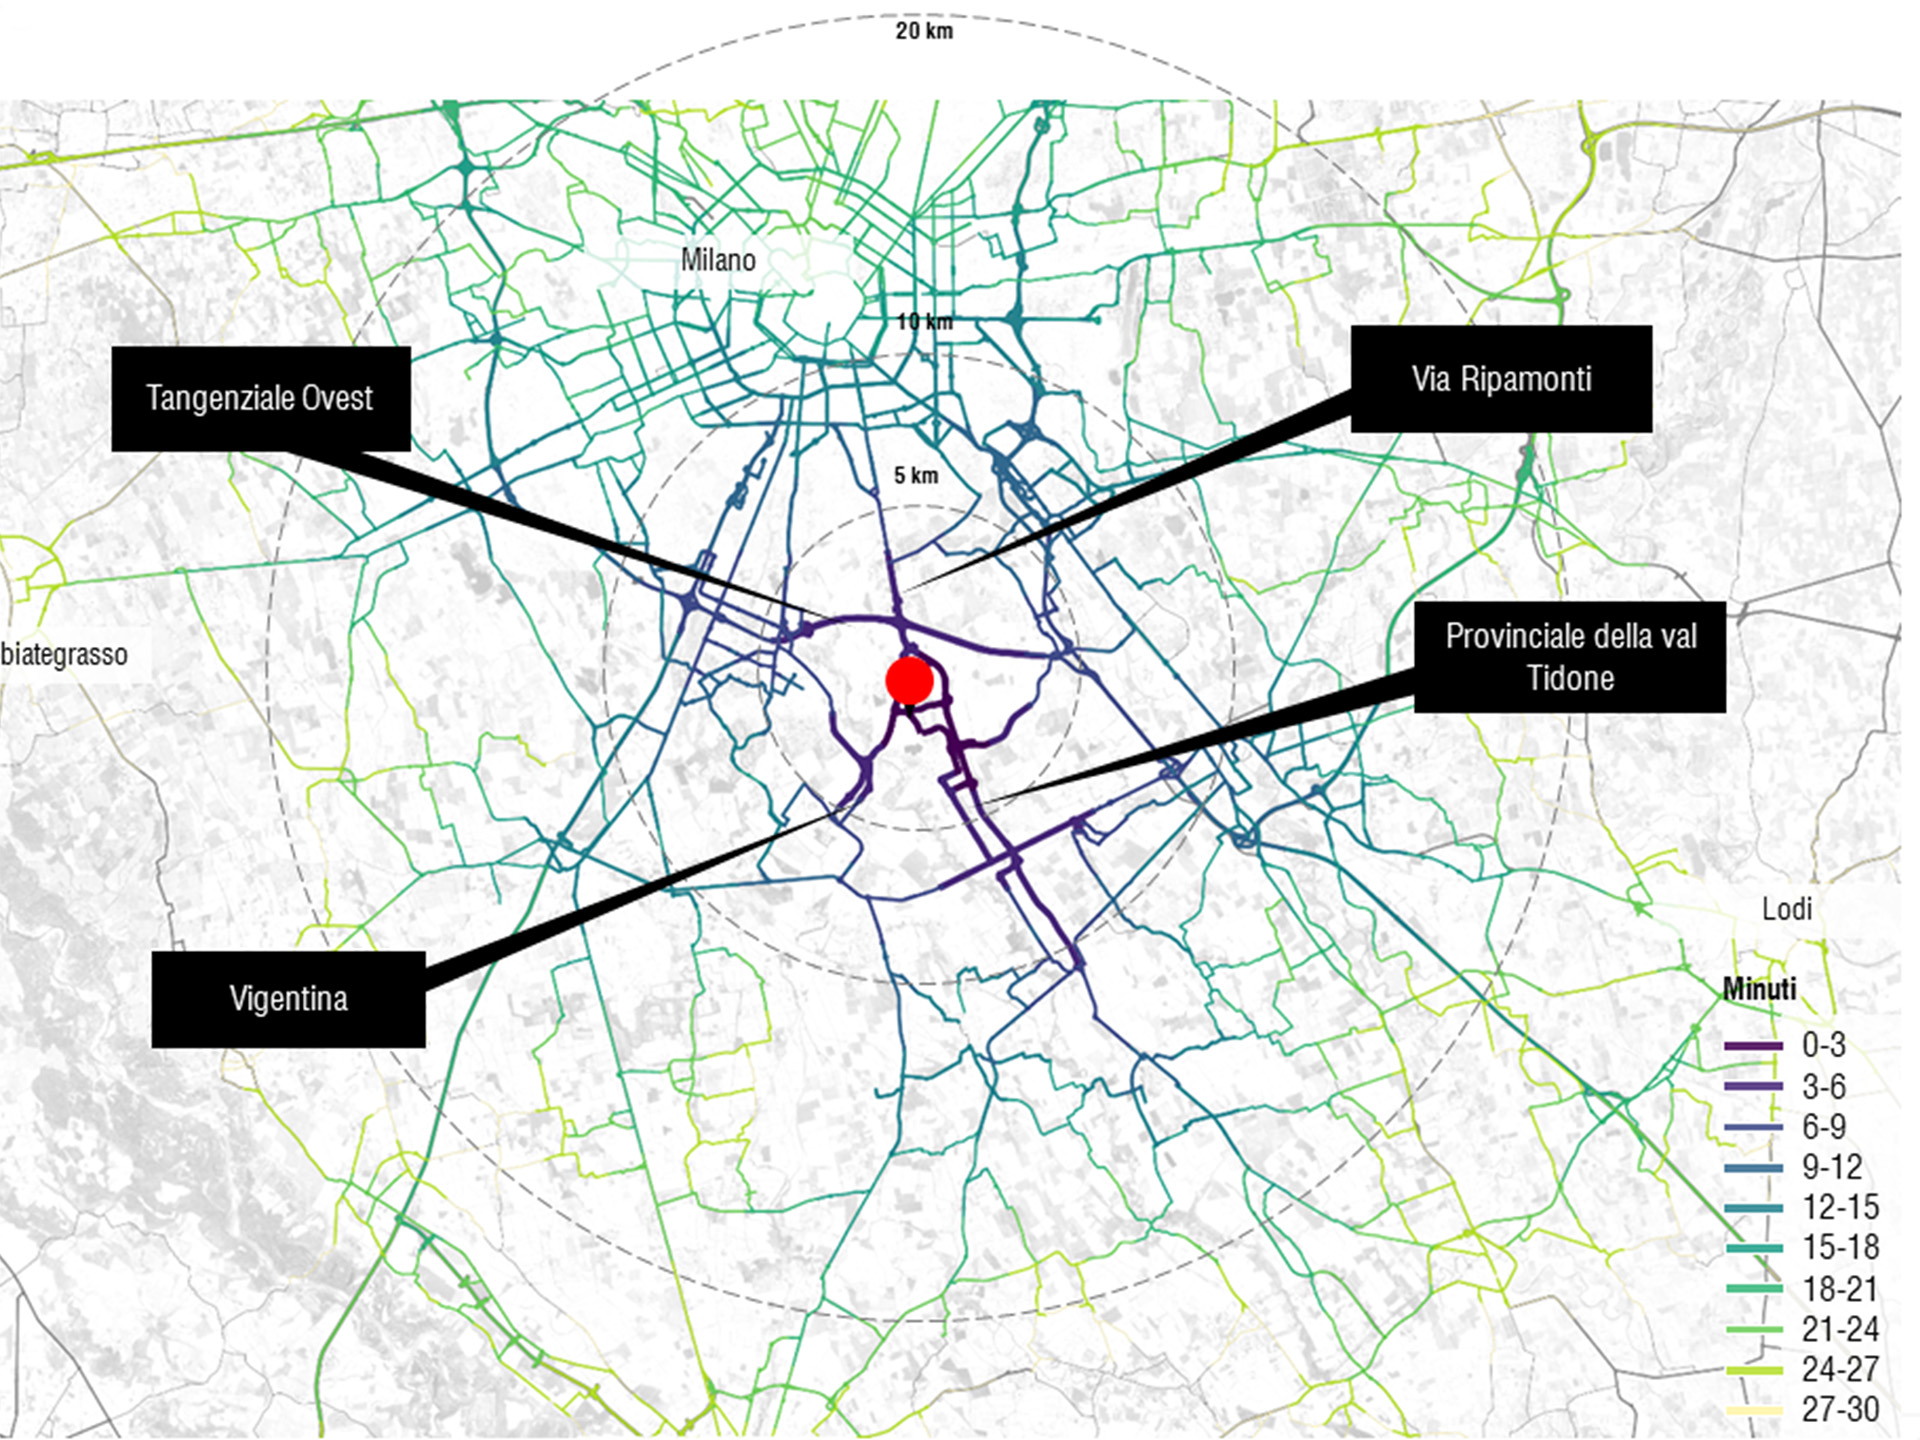 Vehicular access isochrone showing the main trajectories and the travel time